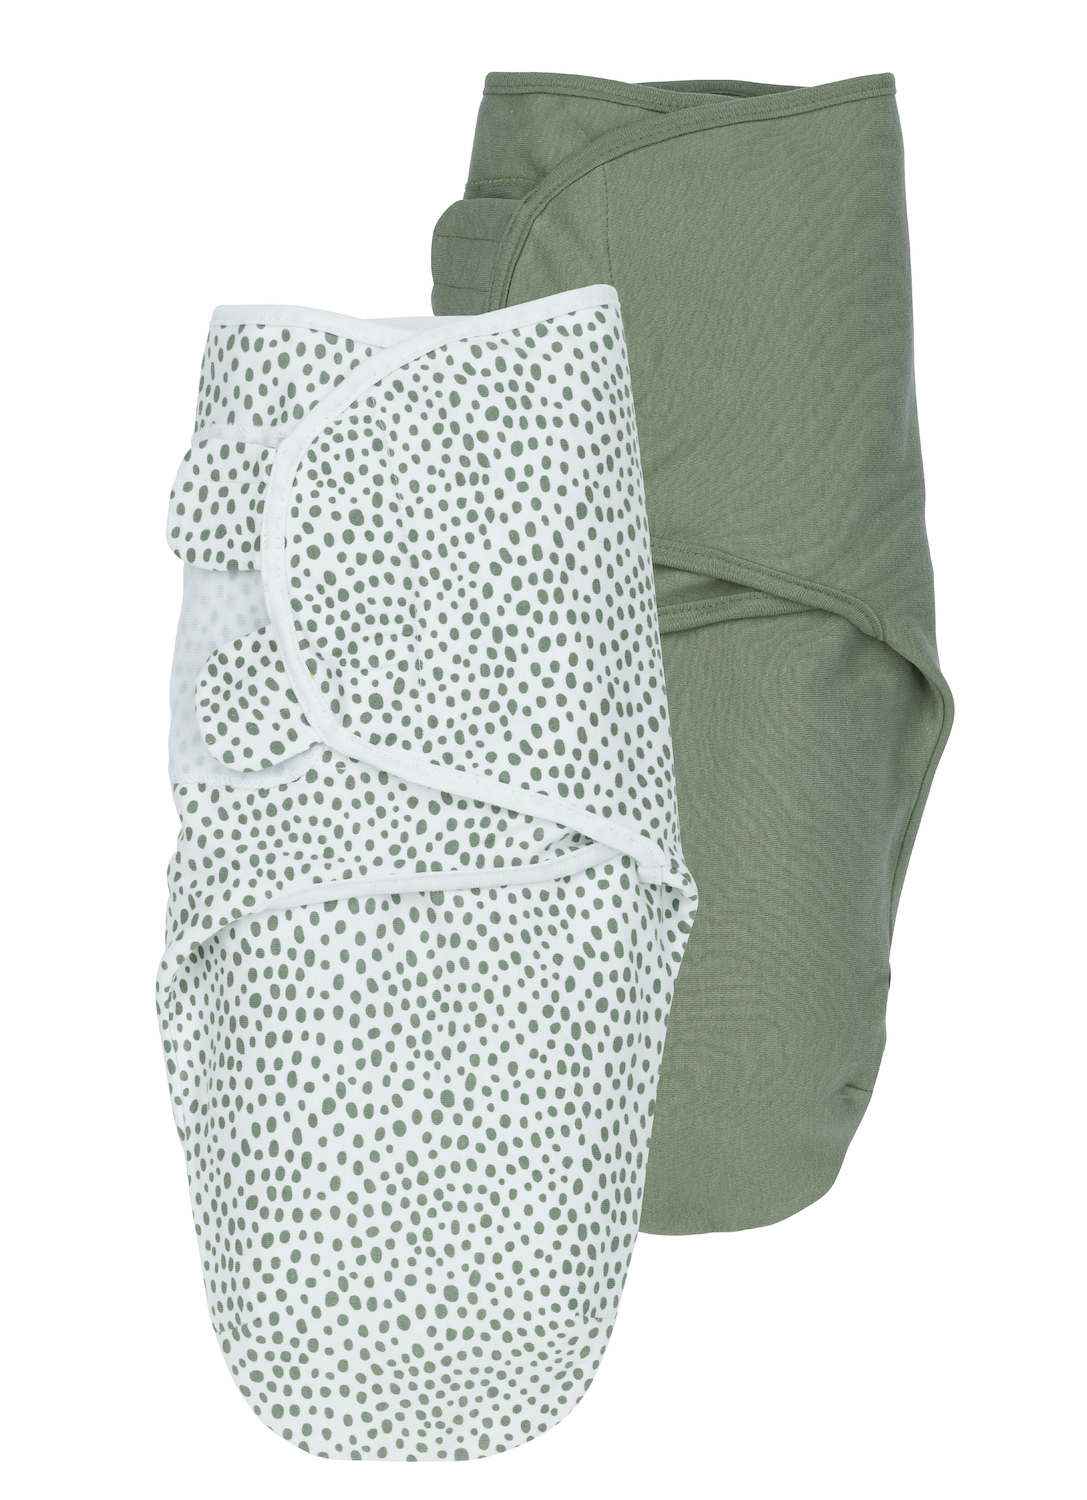 Swaddle 2-pack Cheetah/Uni - forest green - 0-3 Months